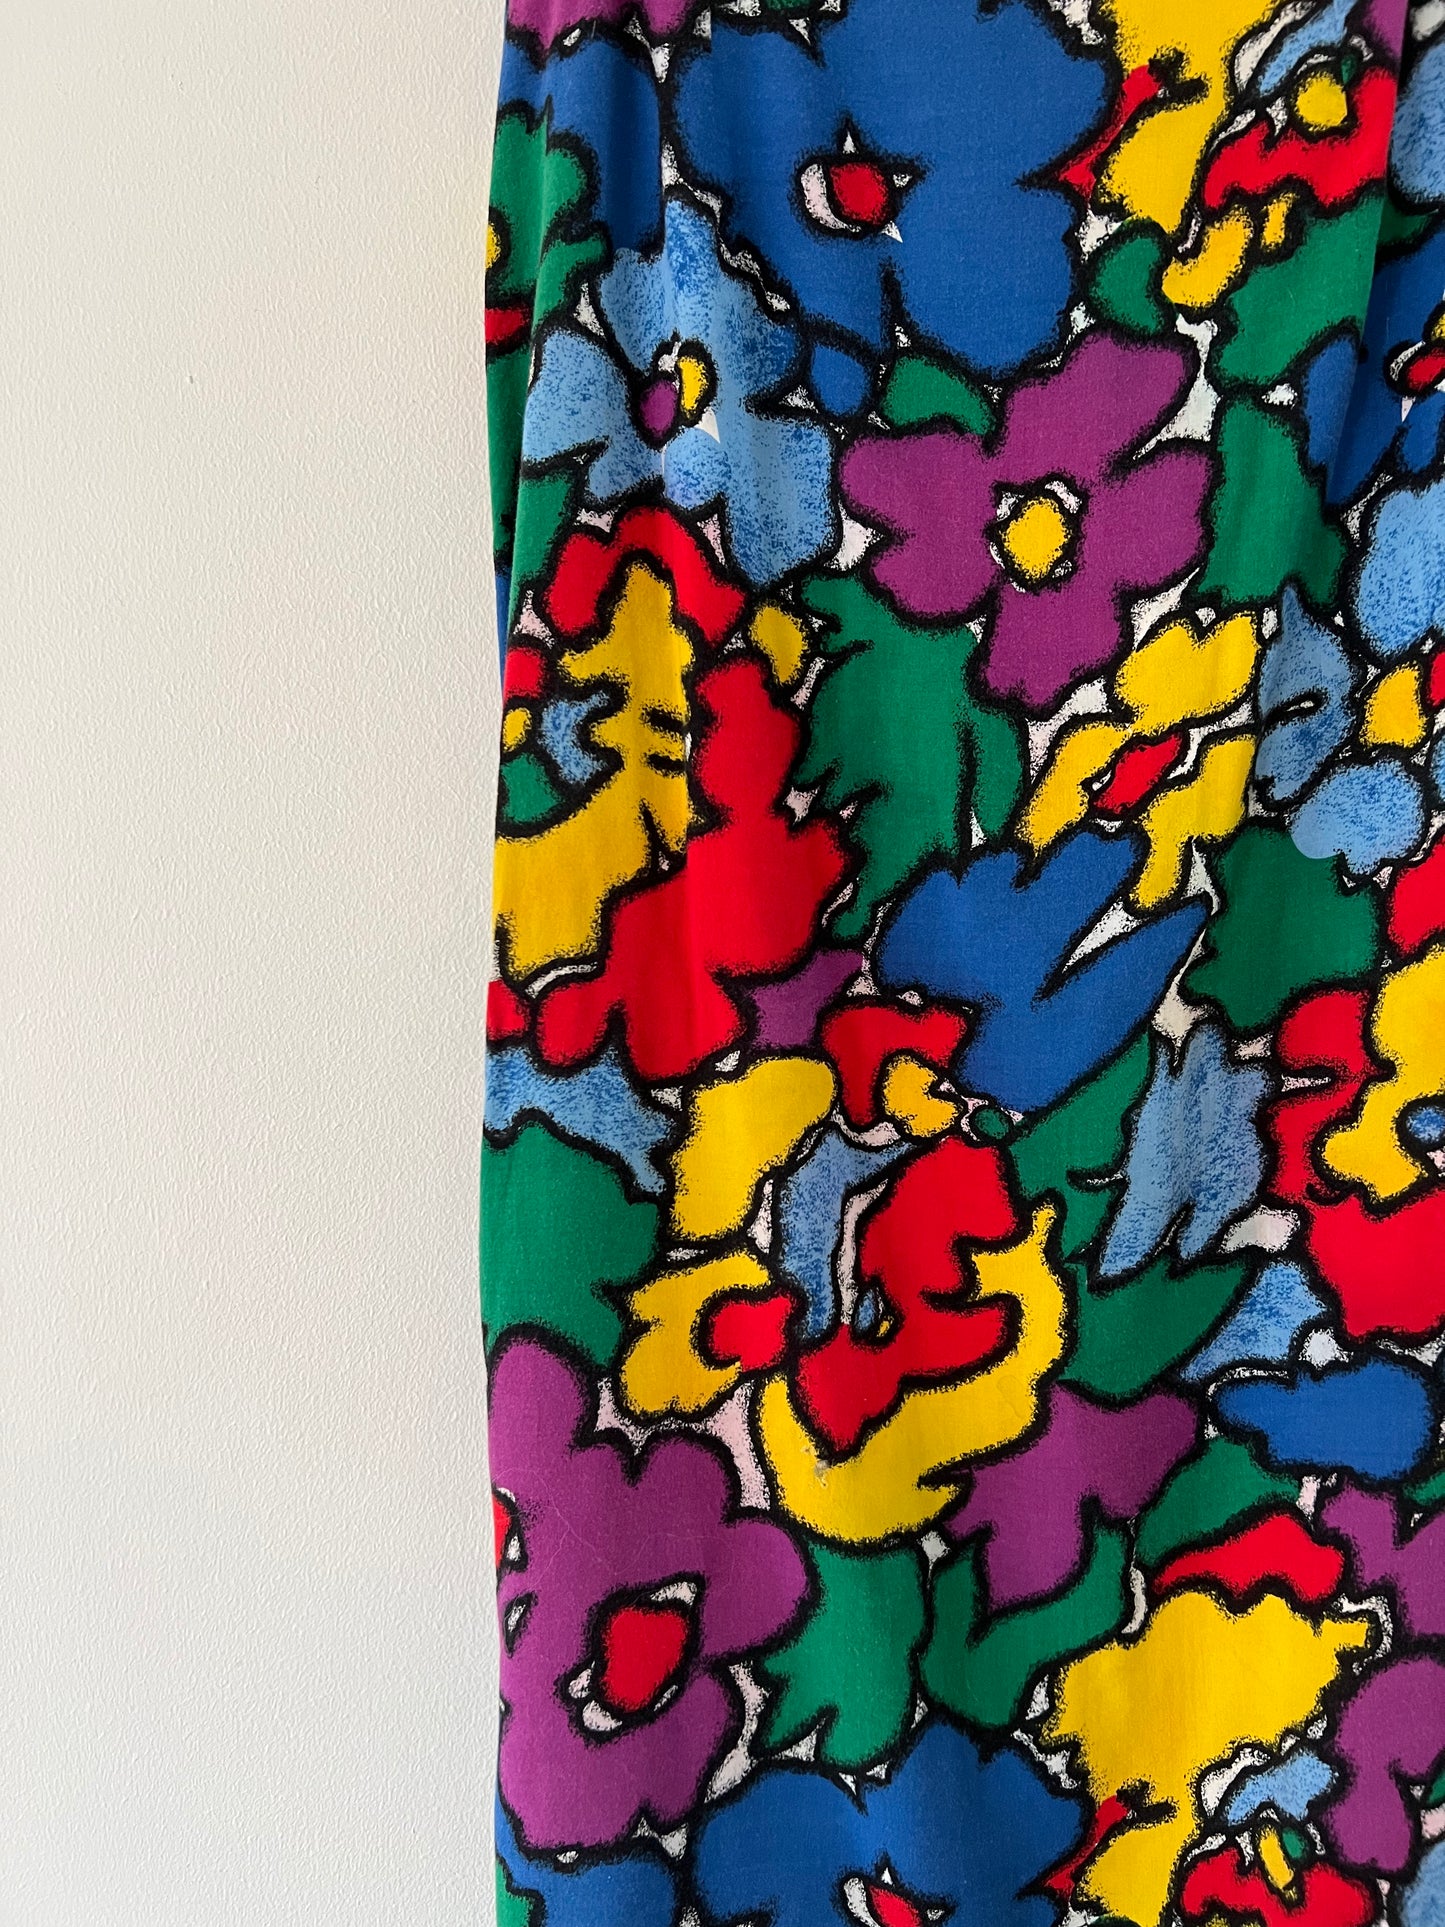 90s Primary Color Floral Skirt